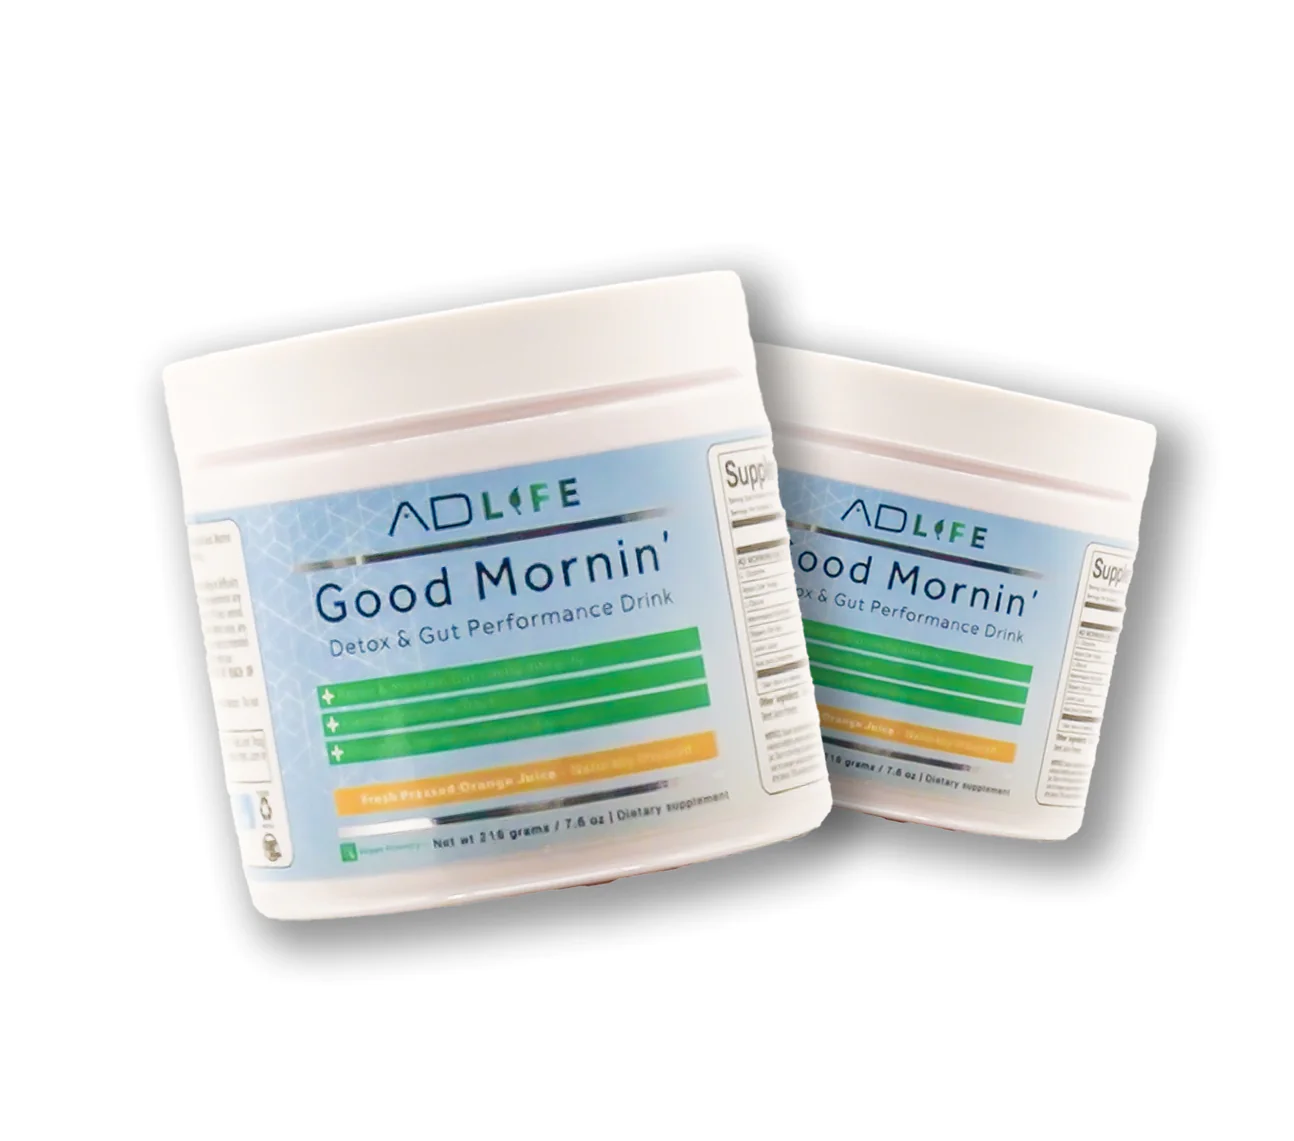 Project AD | Good Mornin' (Detox and Gut Performance Drink)